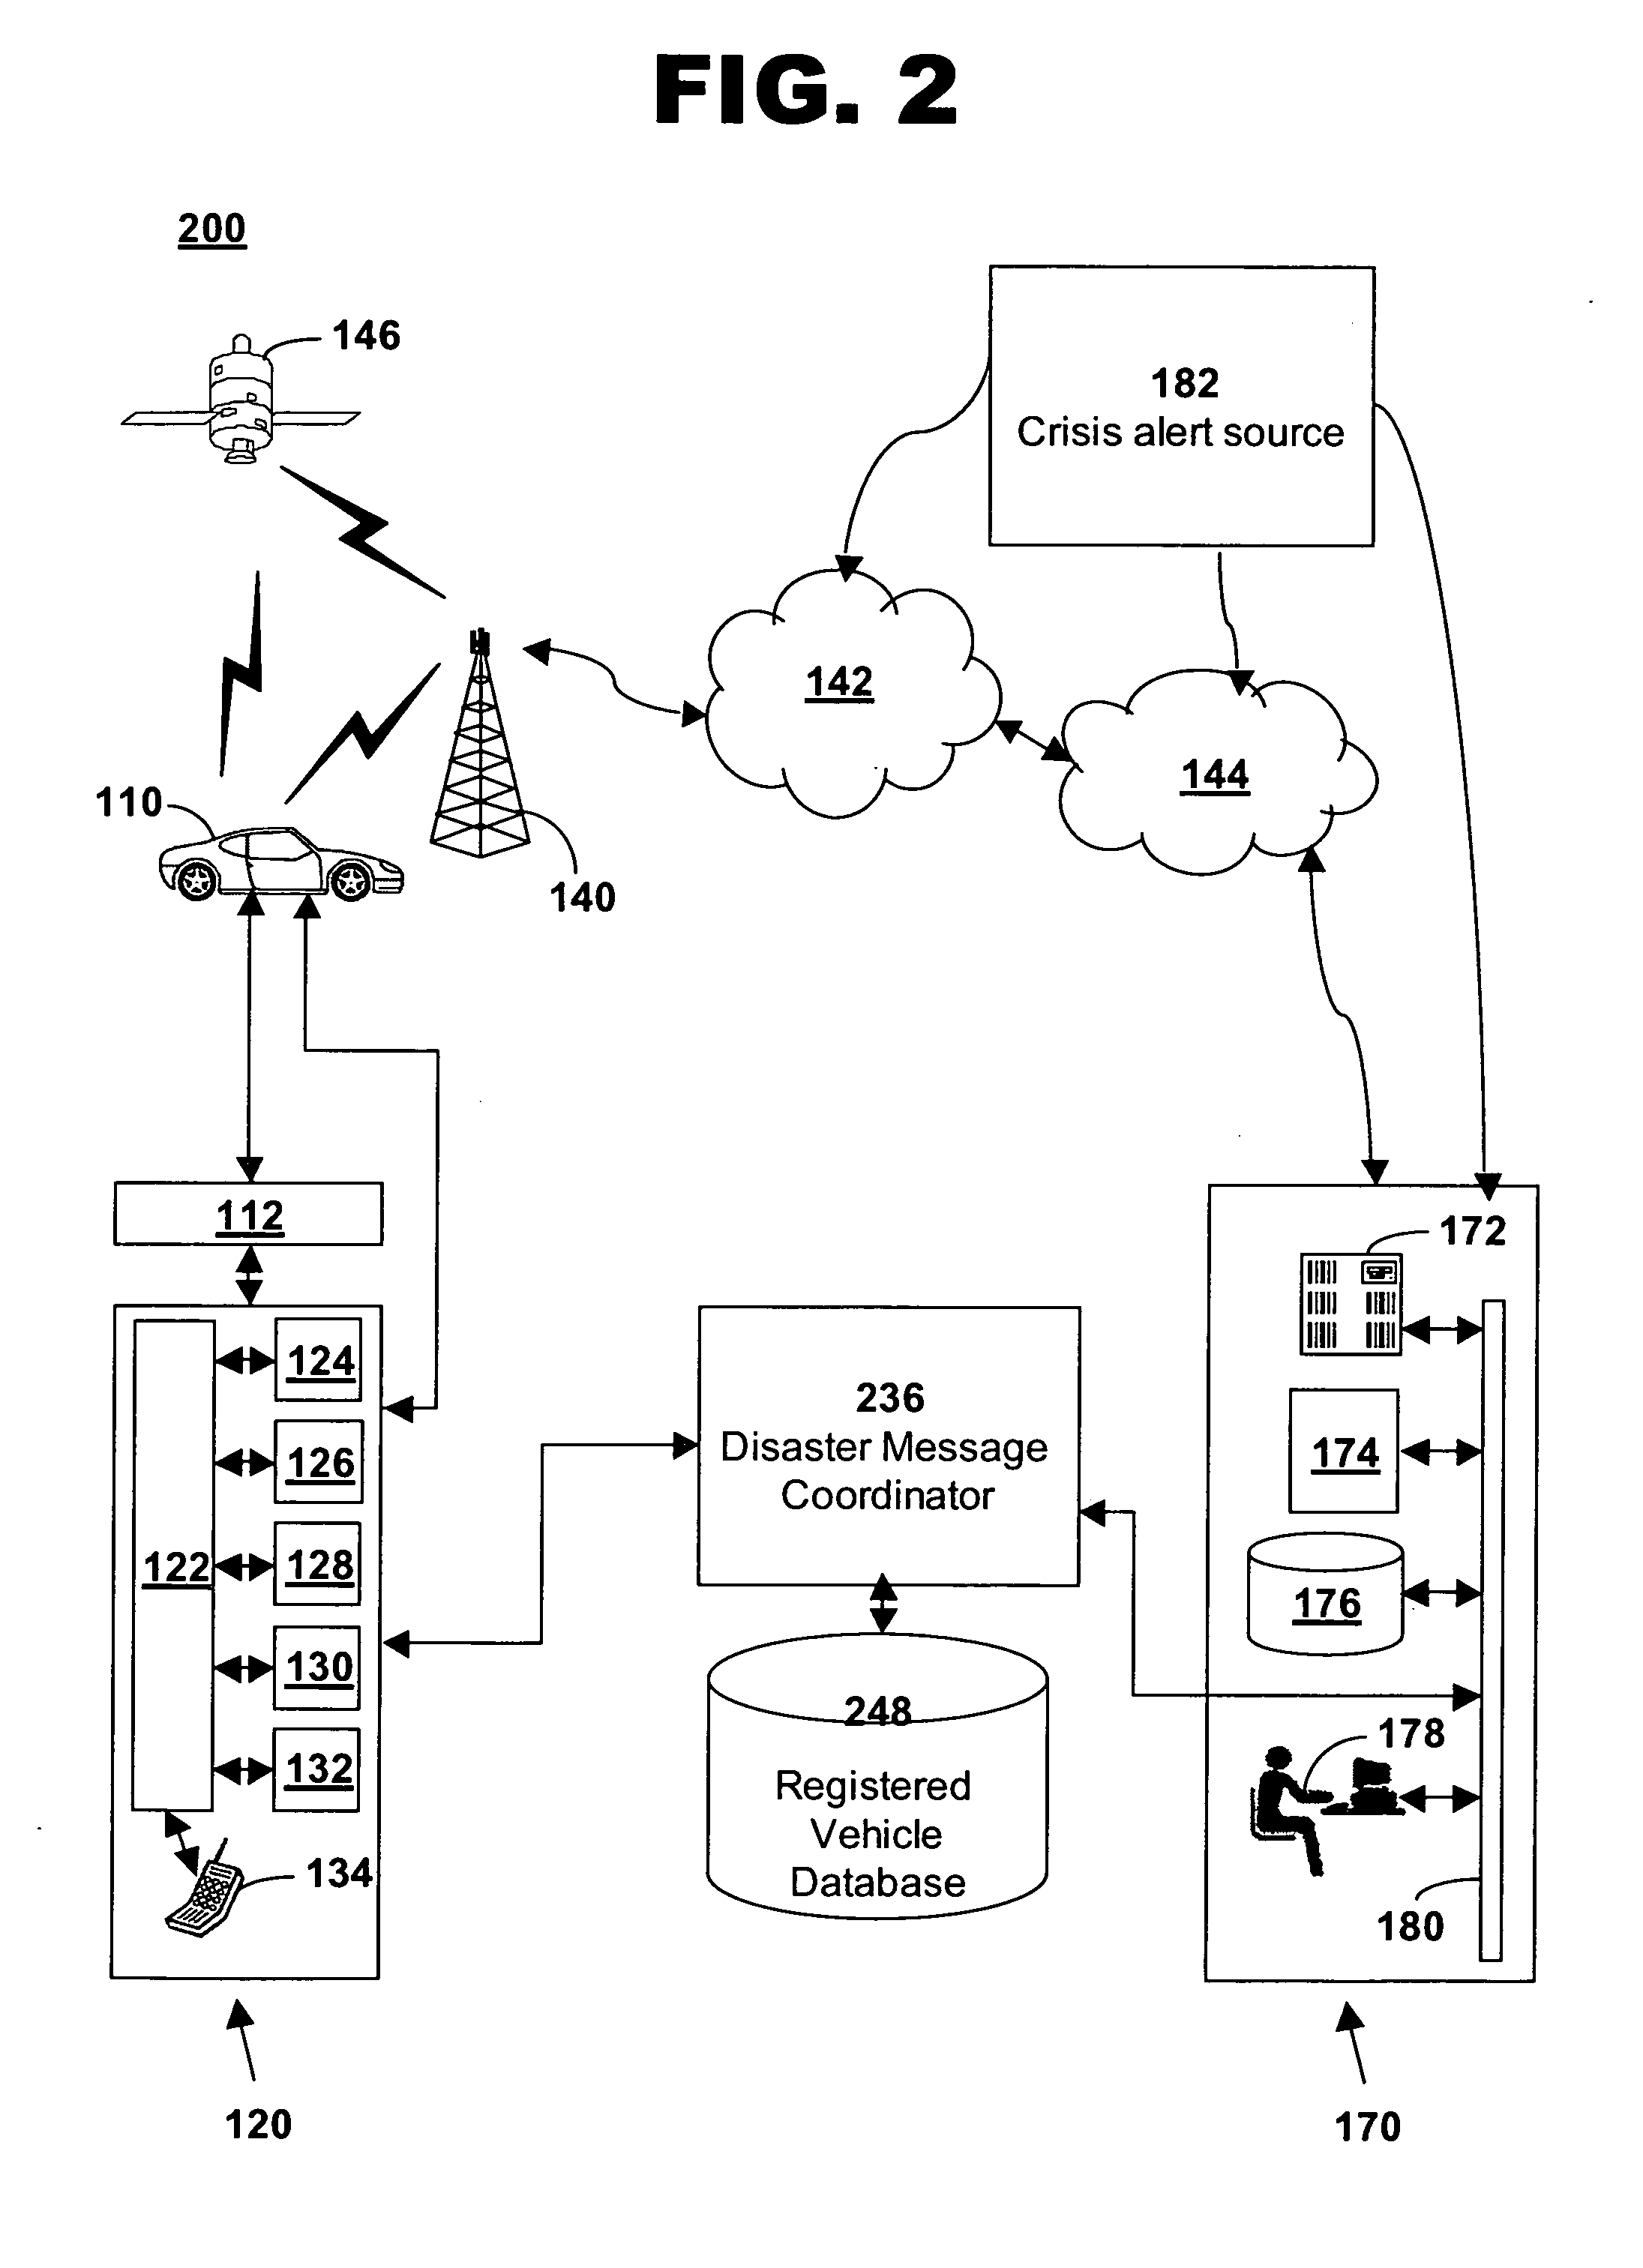 Method and system for deploying disaster alerts in a mobile vehicle communication system